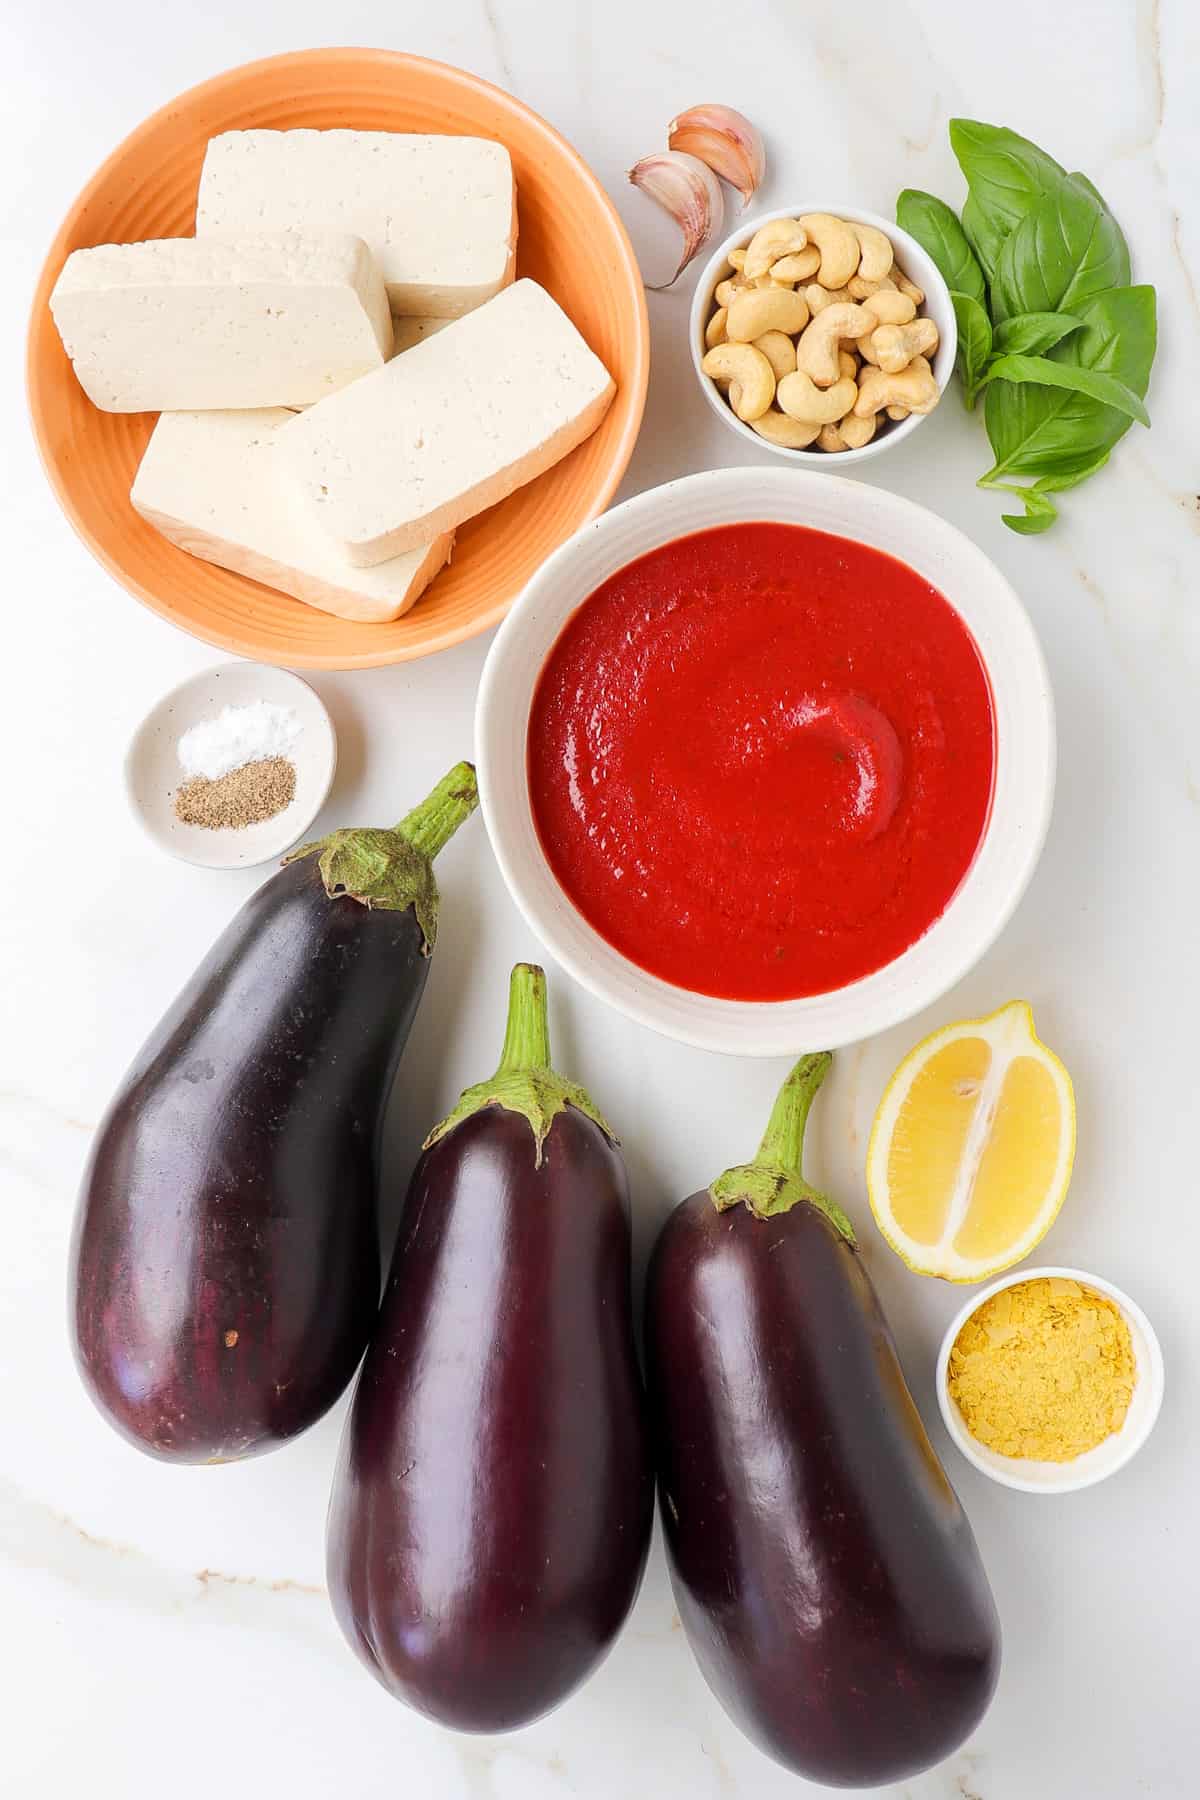 Ingredients shown to make eggplant rollatini.